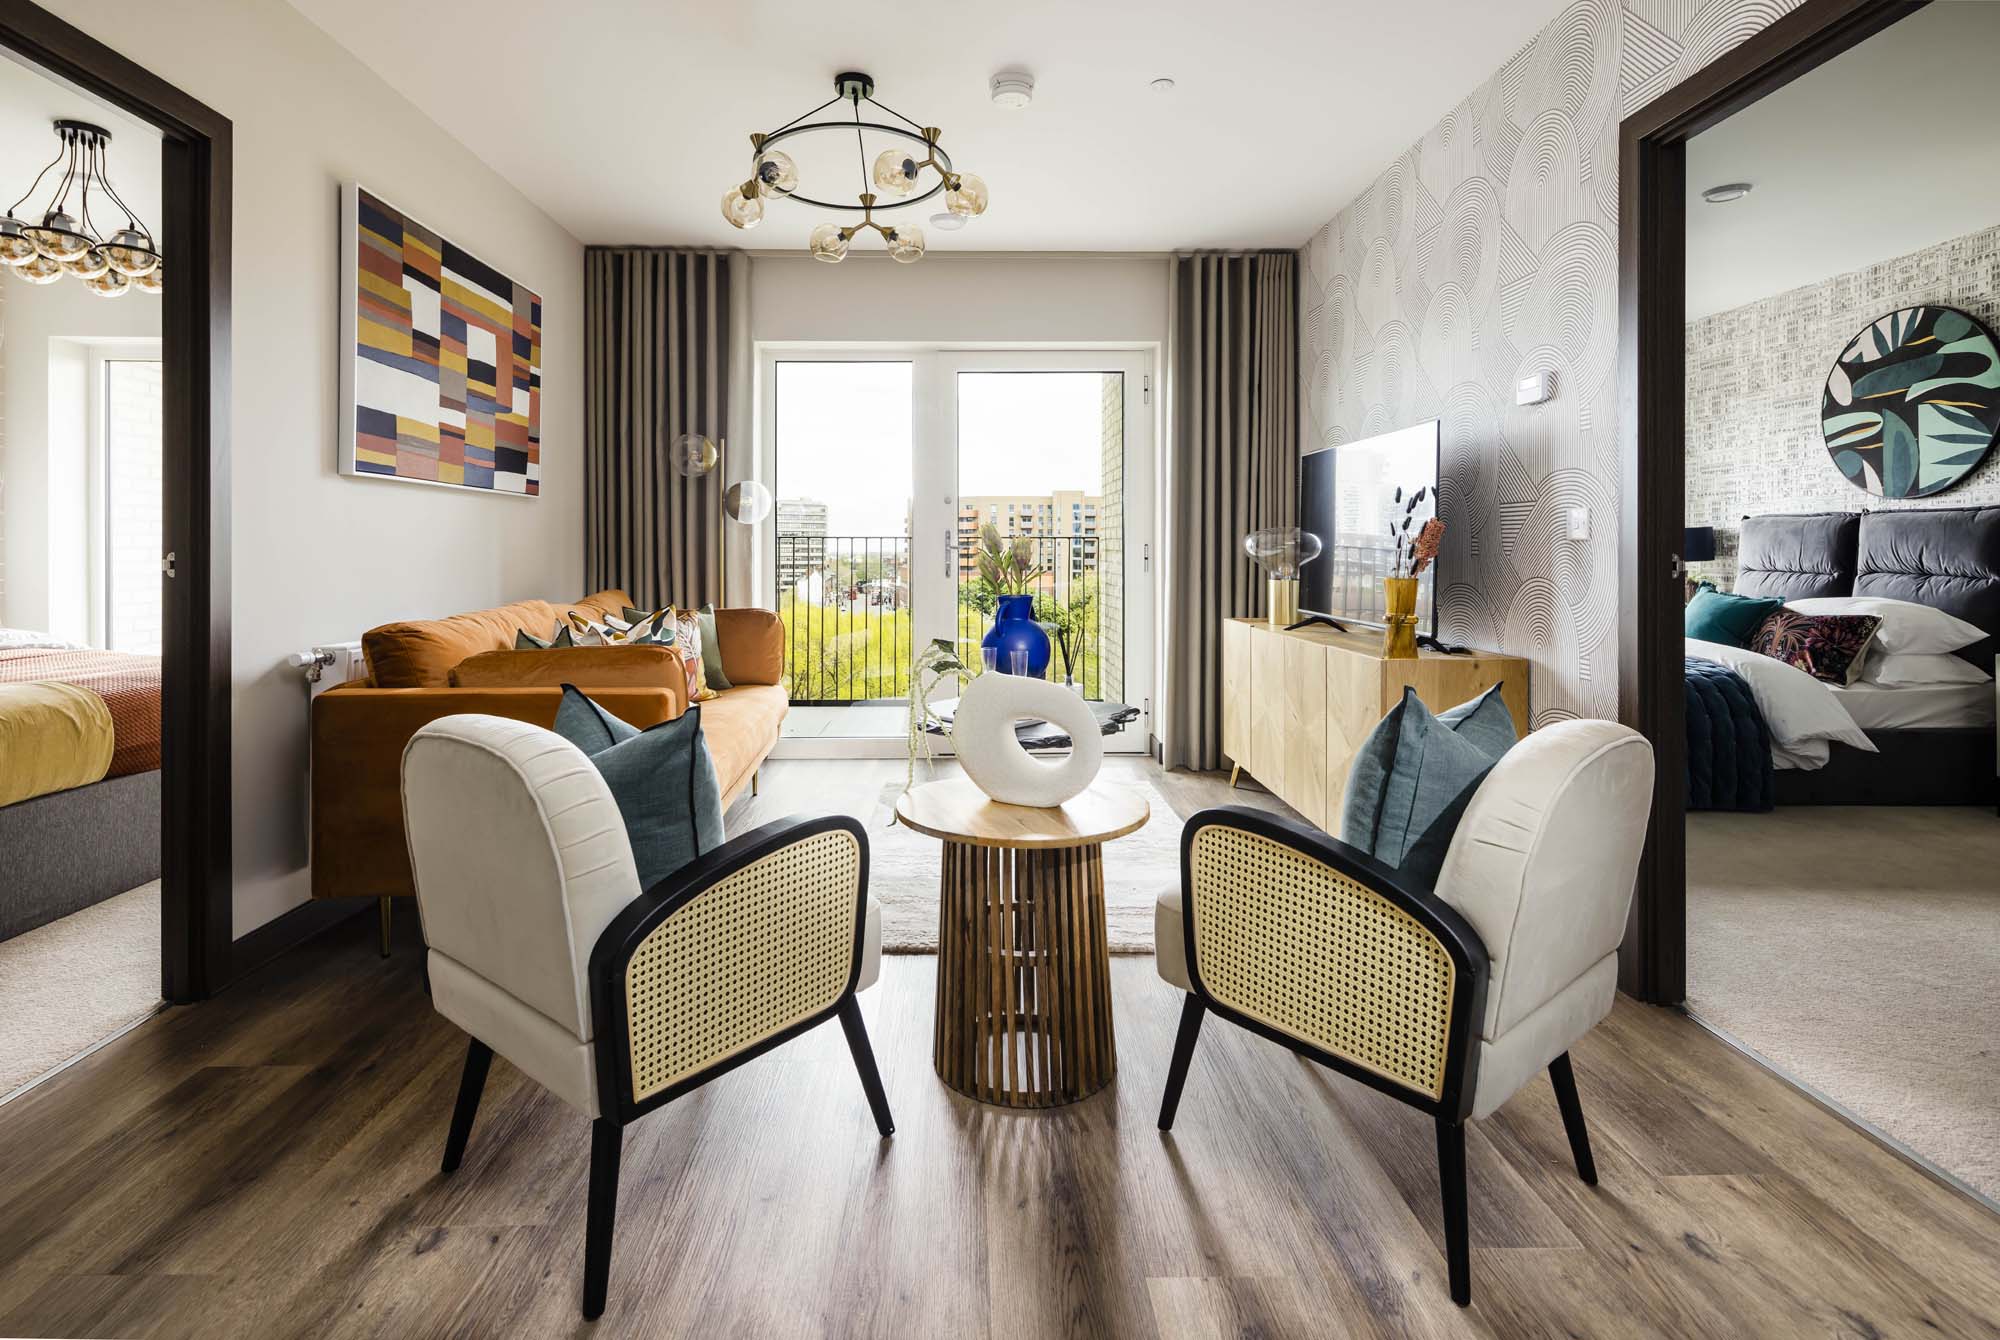 Weston Homes launch new 'Ways to Buy' campaign